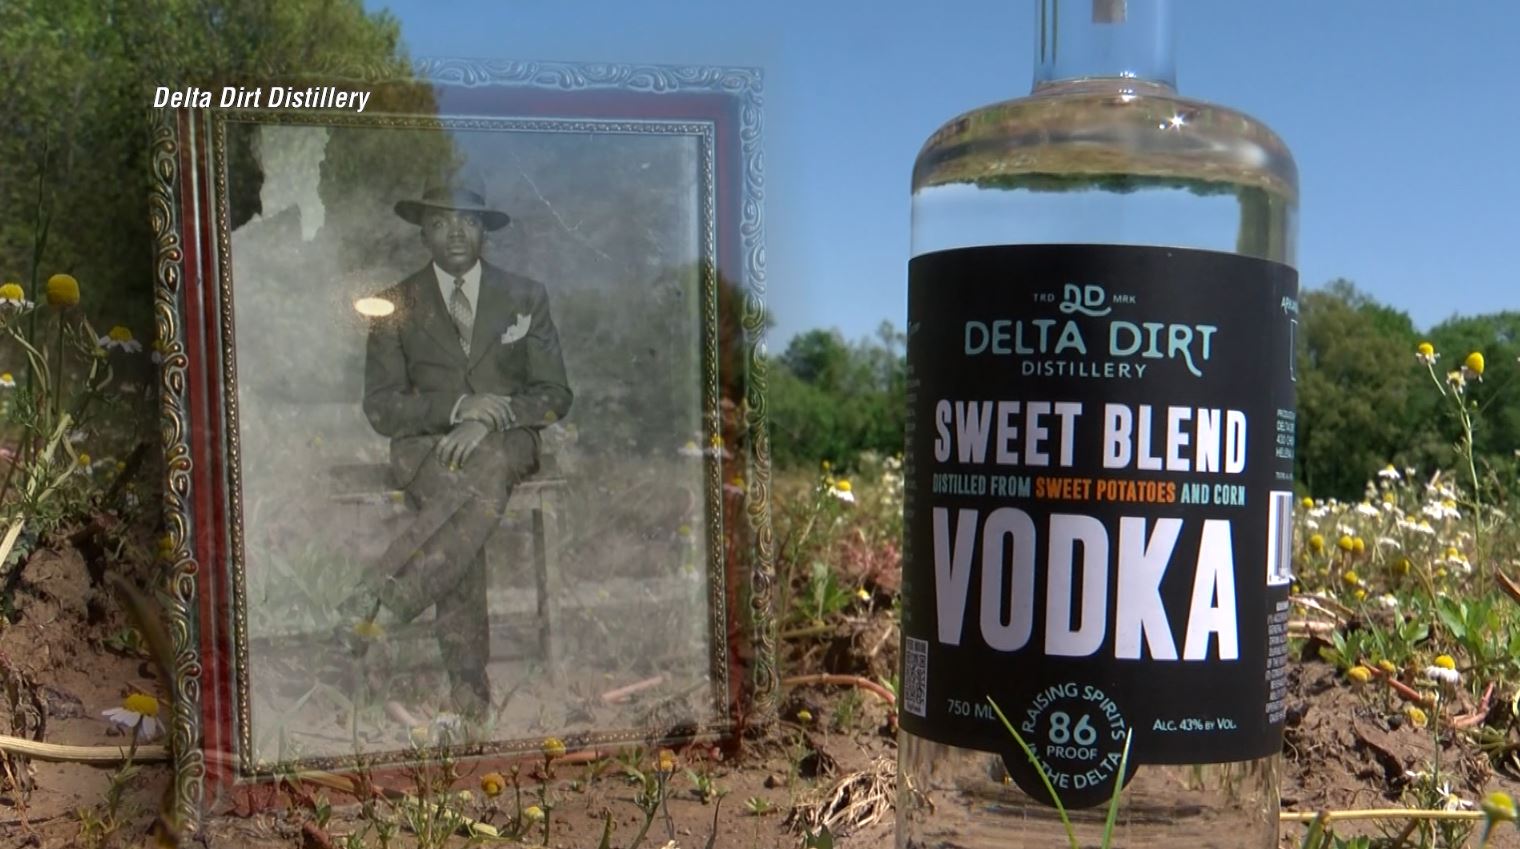 5 Star Stories: The legacy of Delta Dirt Distillery